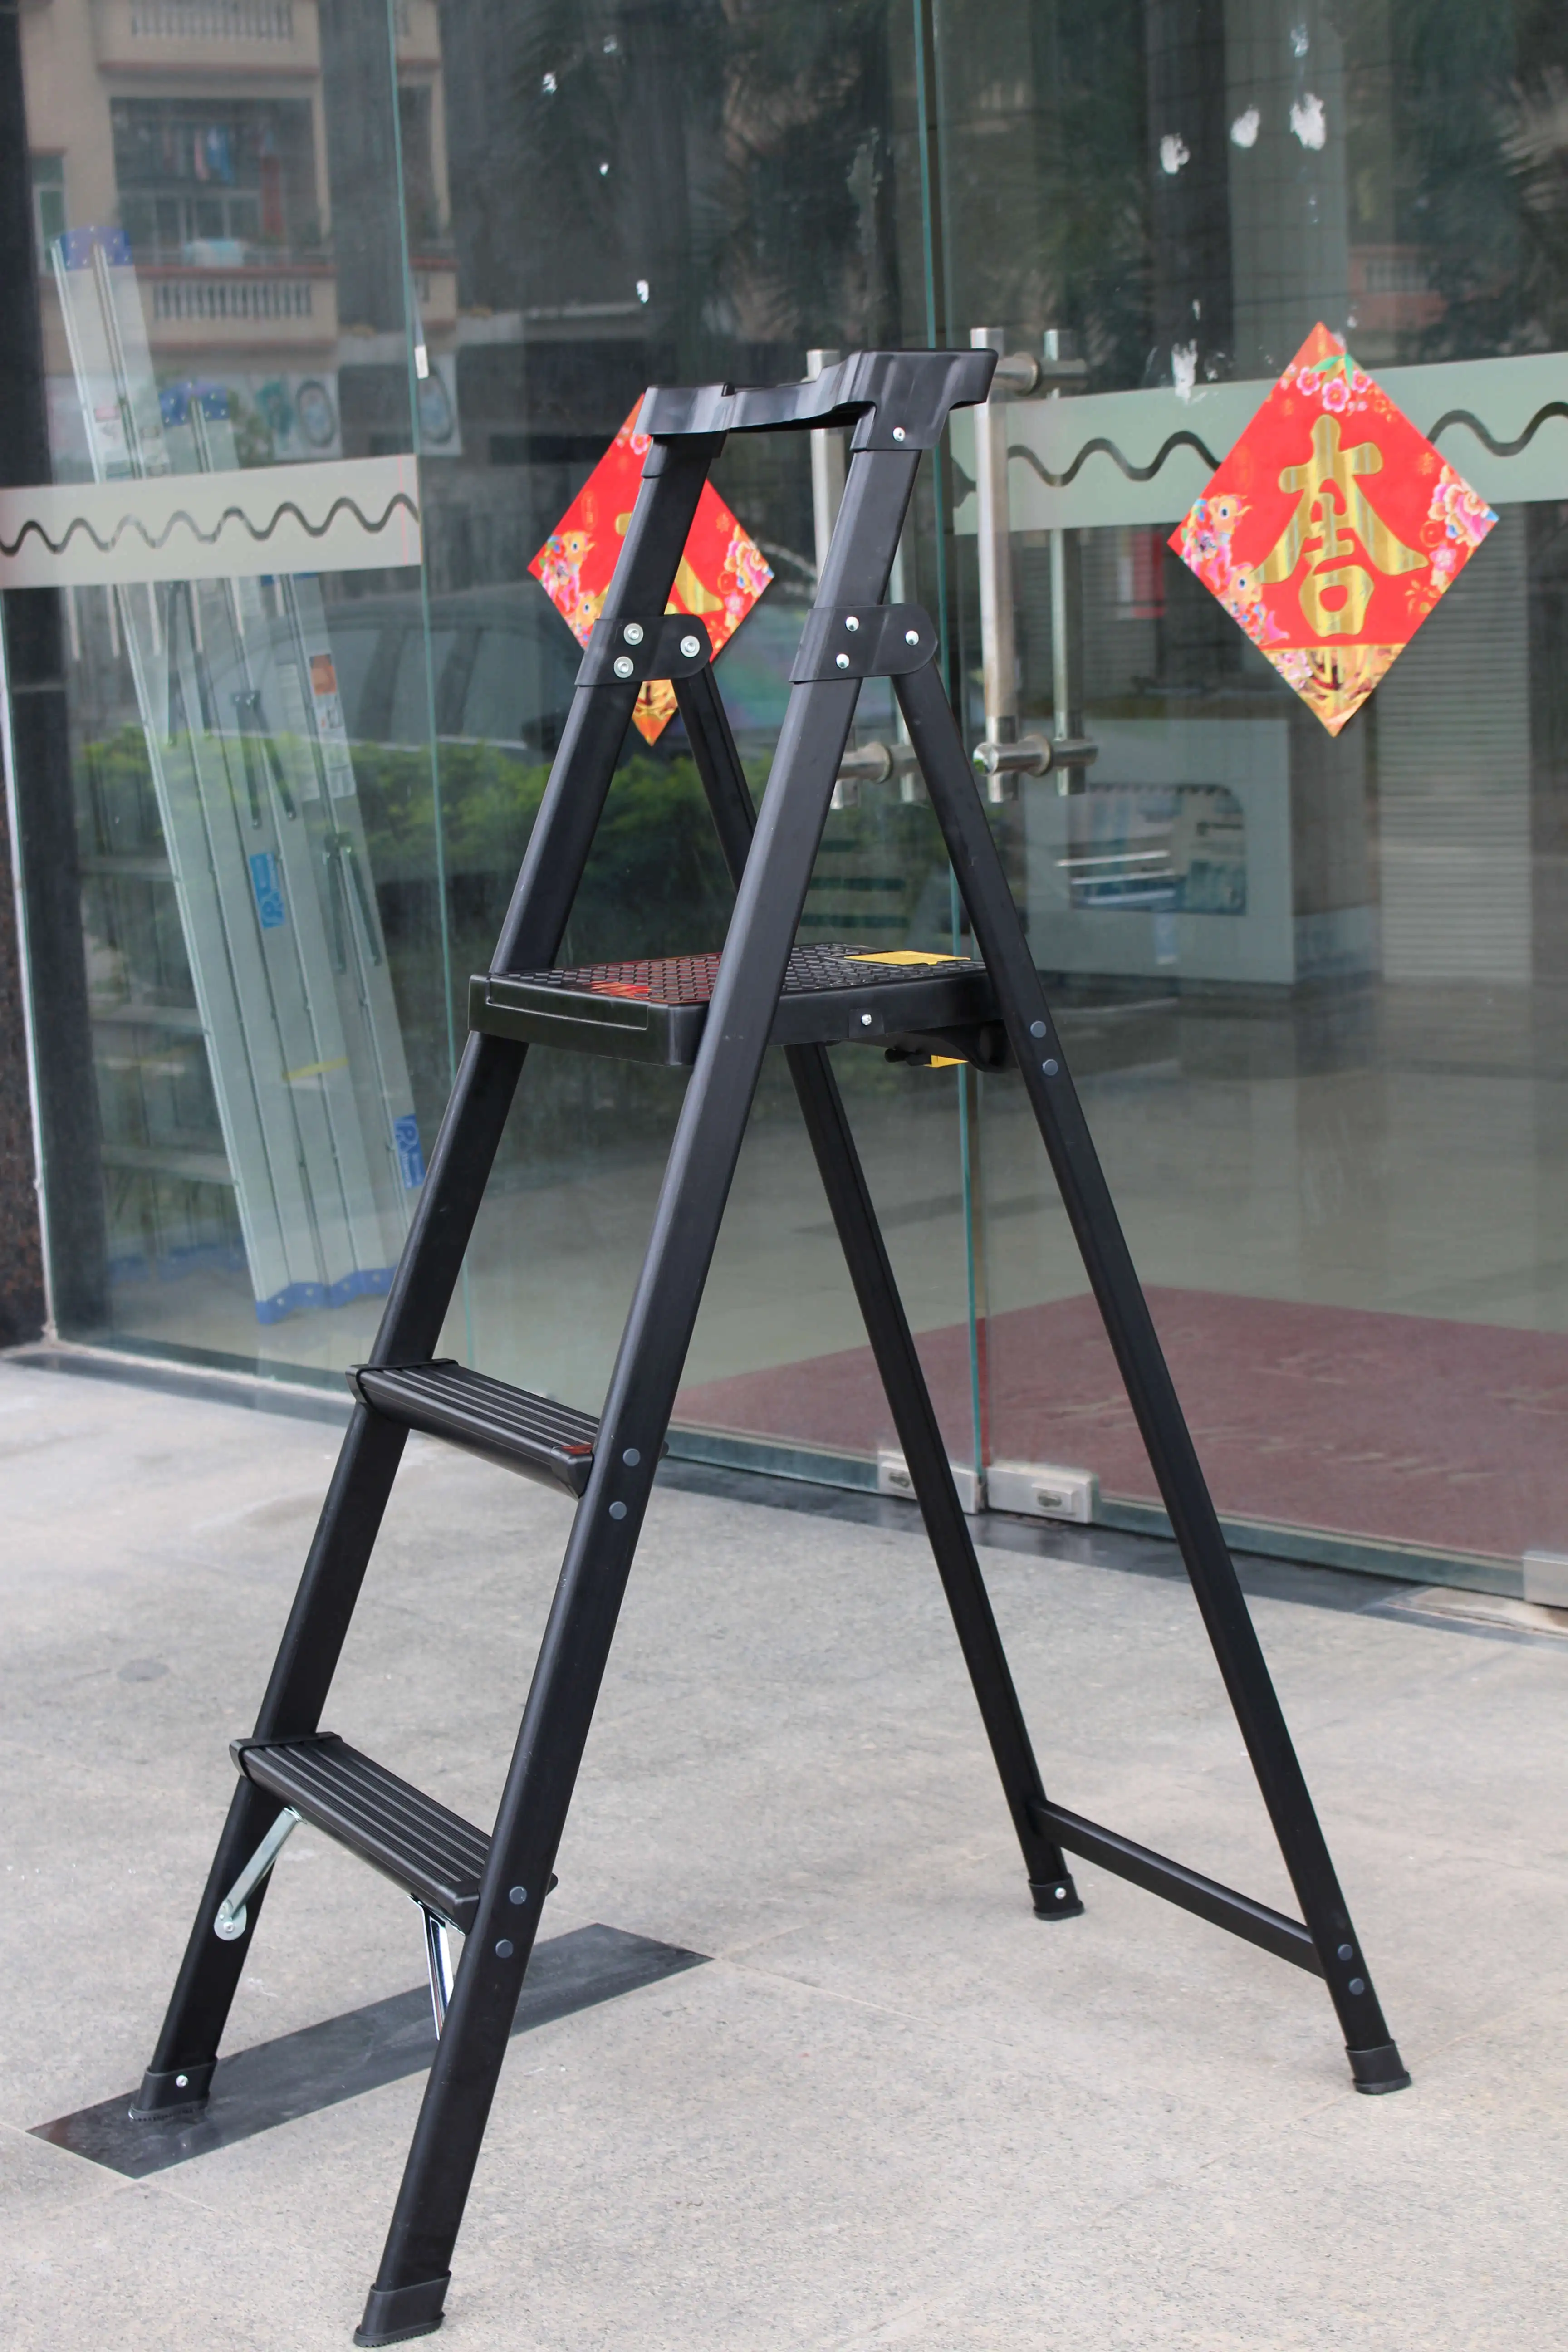 Aluminum Plastic Step Stool Household Ladder / Hot Sale House Hold Ladder / Portable Ladder - Buy Folding With Handrail,Folding Ladders,Metal Folding Ladders Product on Alibaba.com